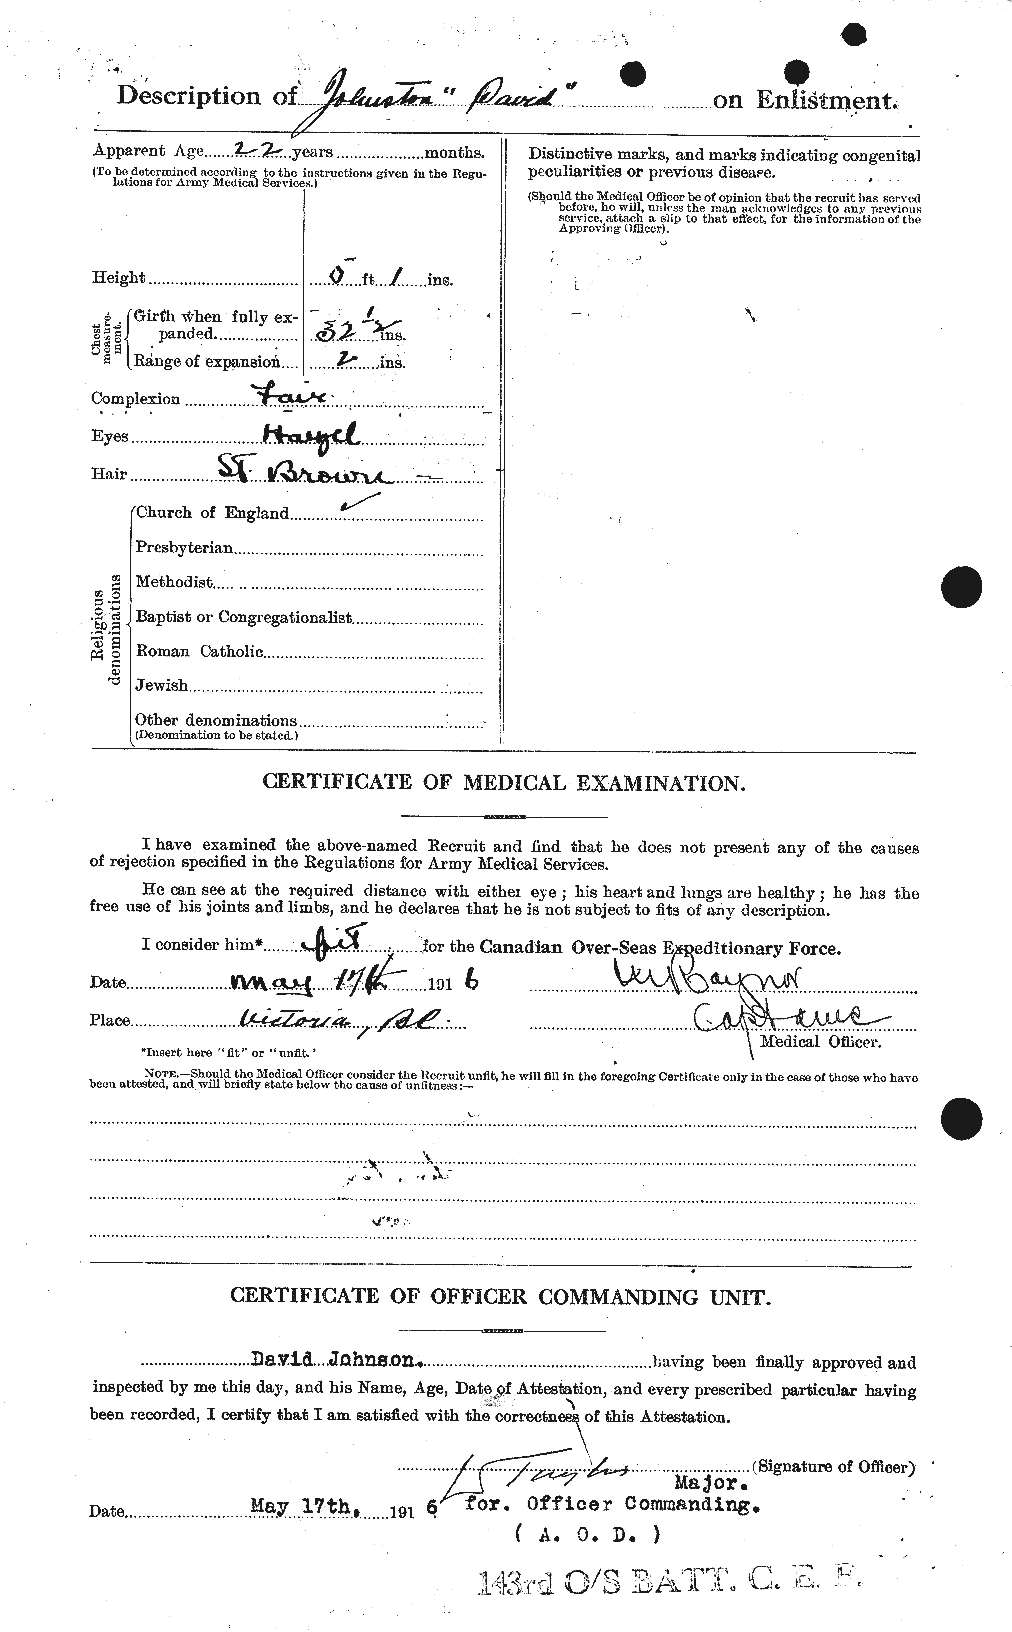 Personnel Records of the First World War - CEF 423154b